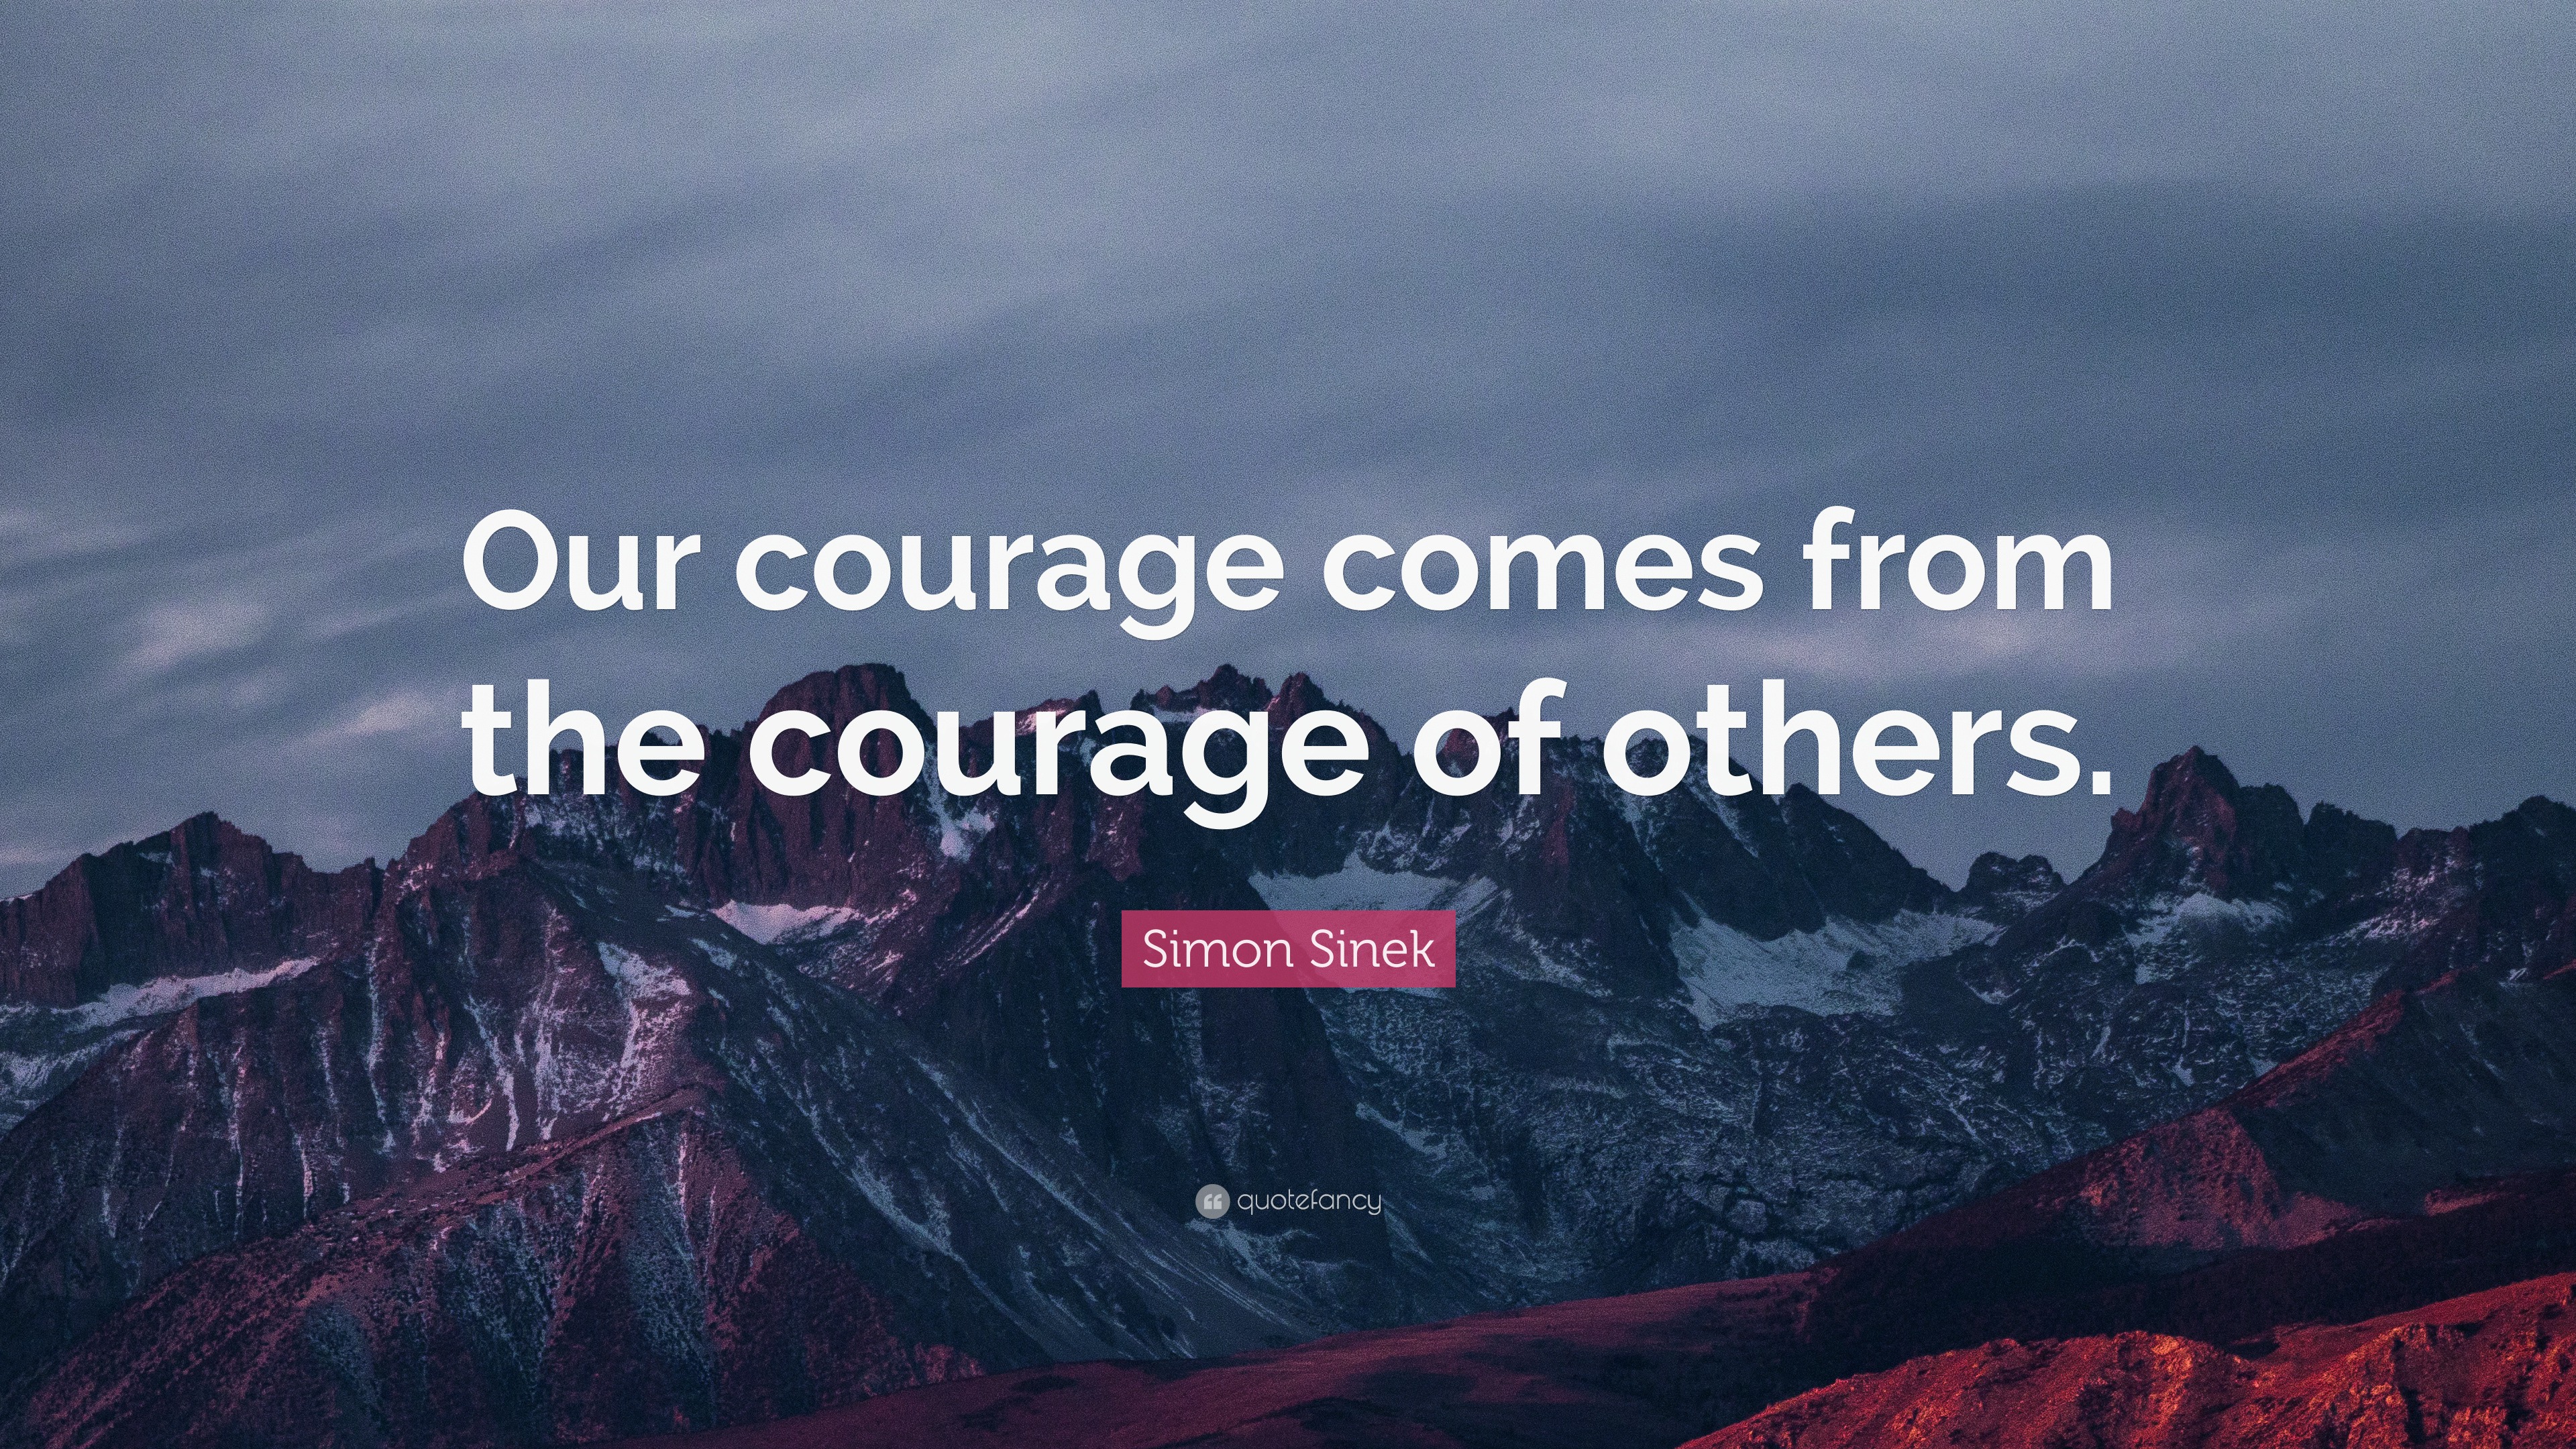 Simon Sinek Quote: “Our courage comes from the courage of others.”